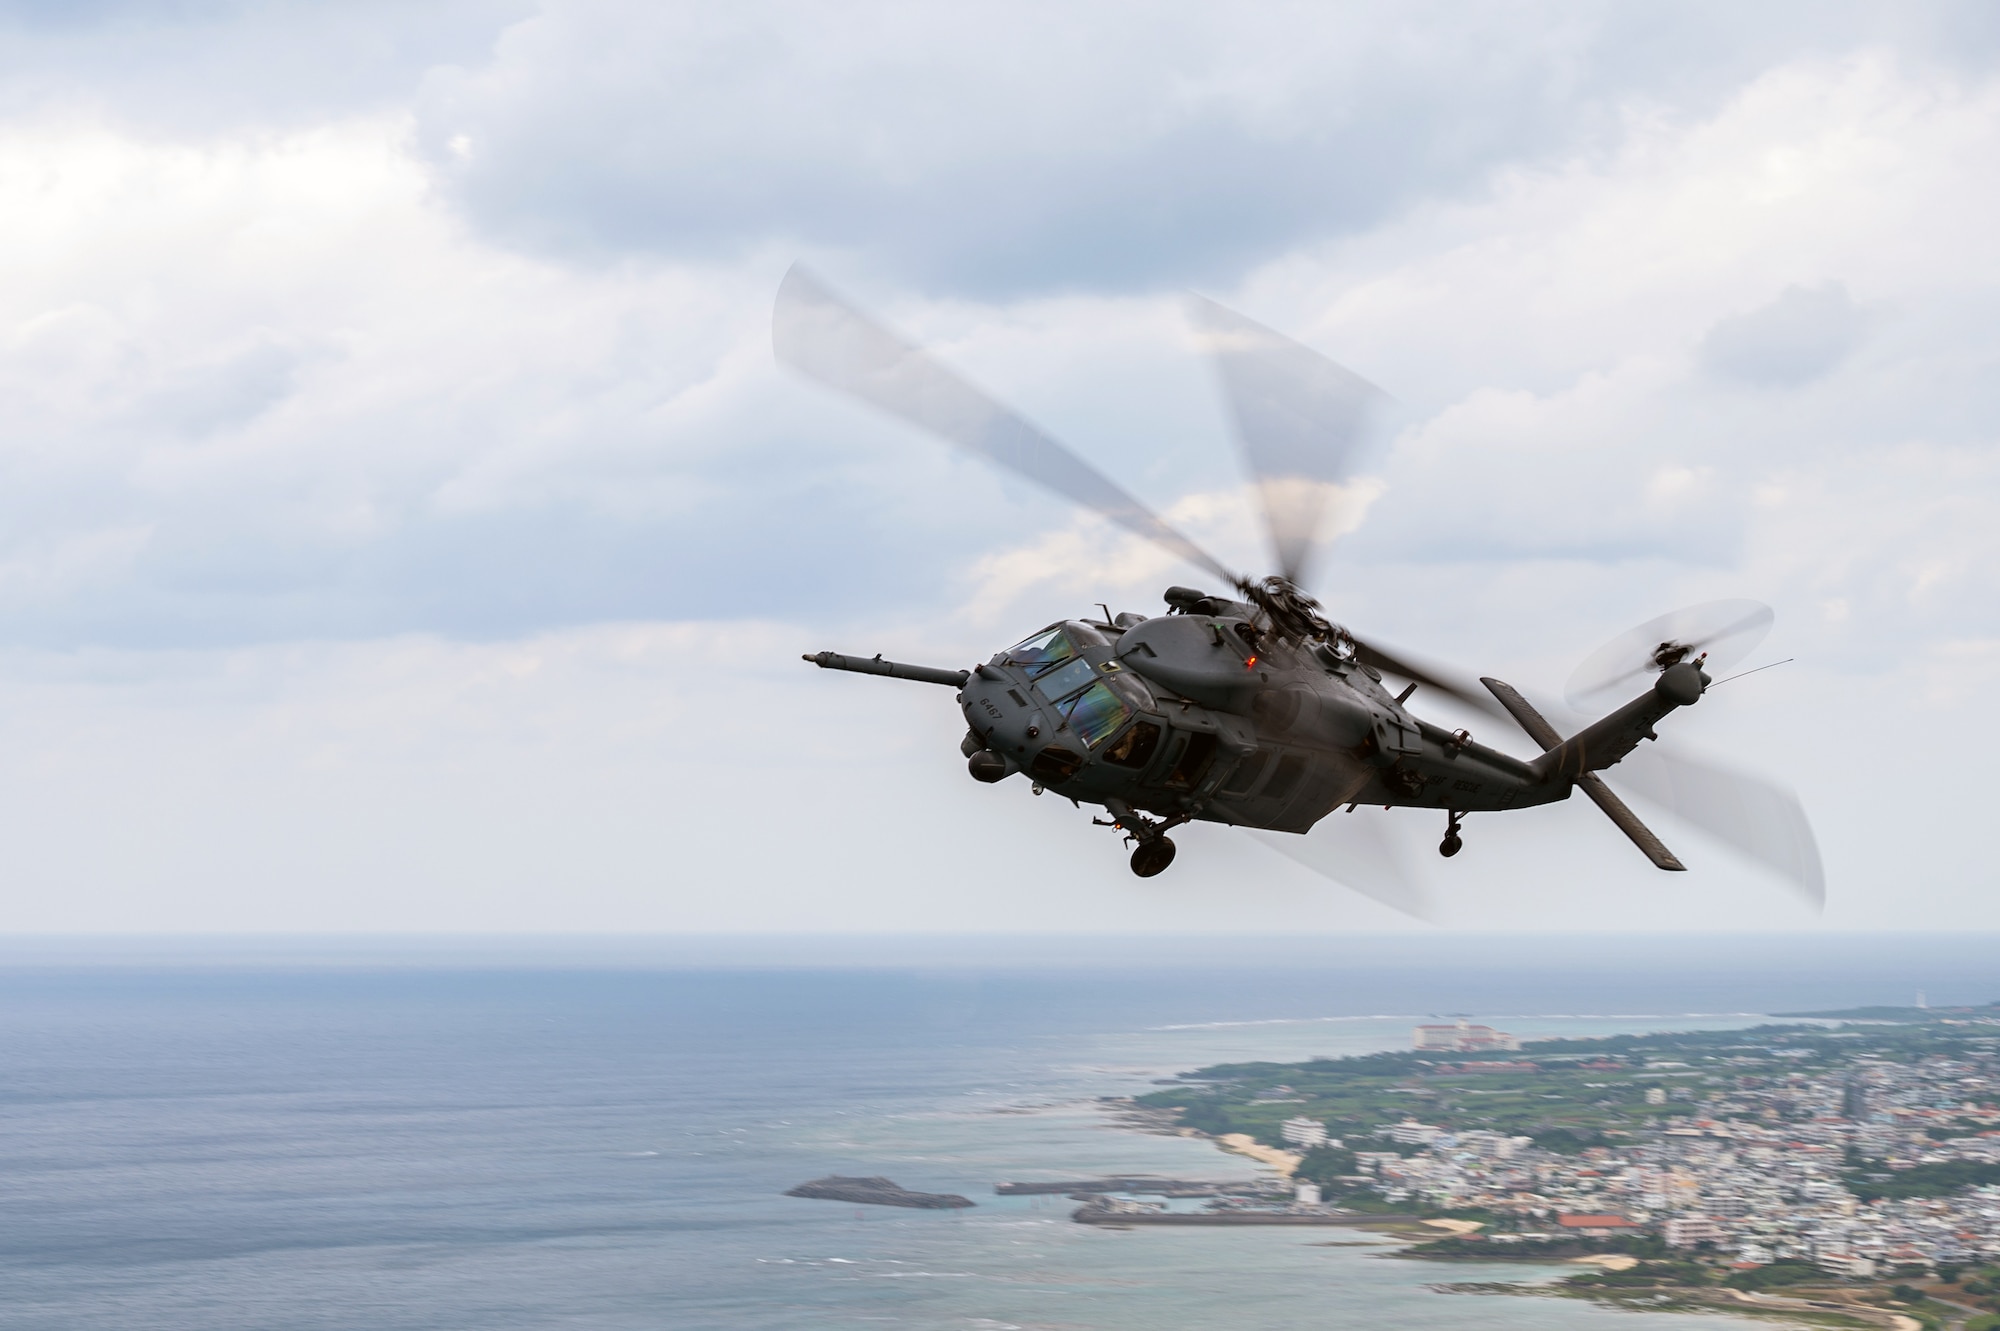 A HH-60G Pave Hawk helicopter flies over Okinawa.